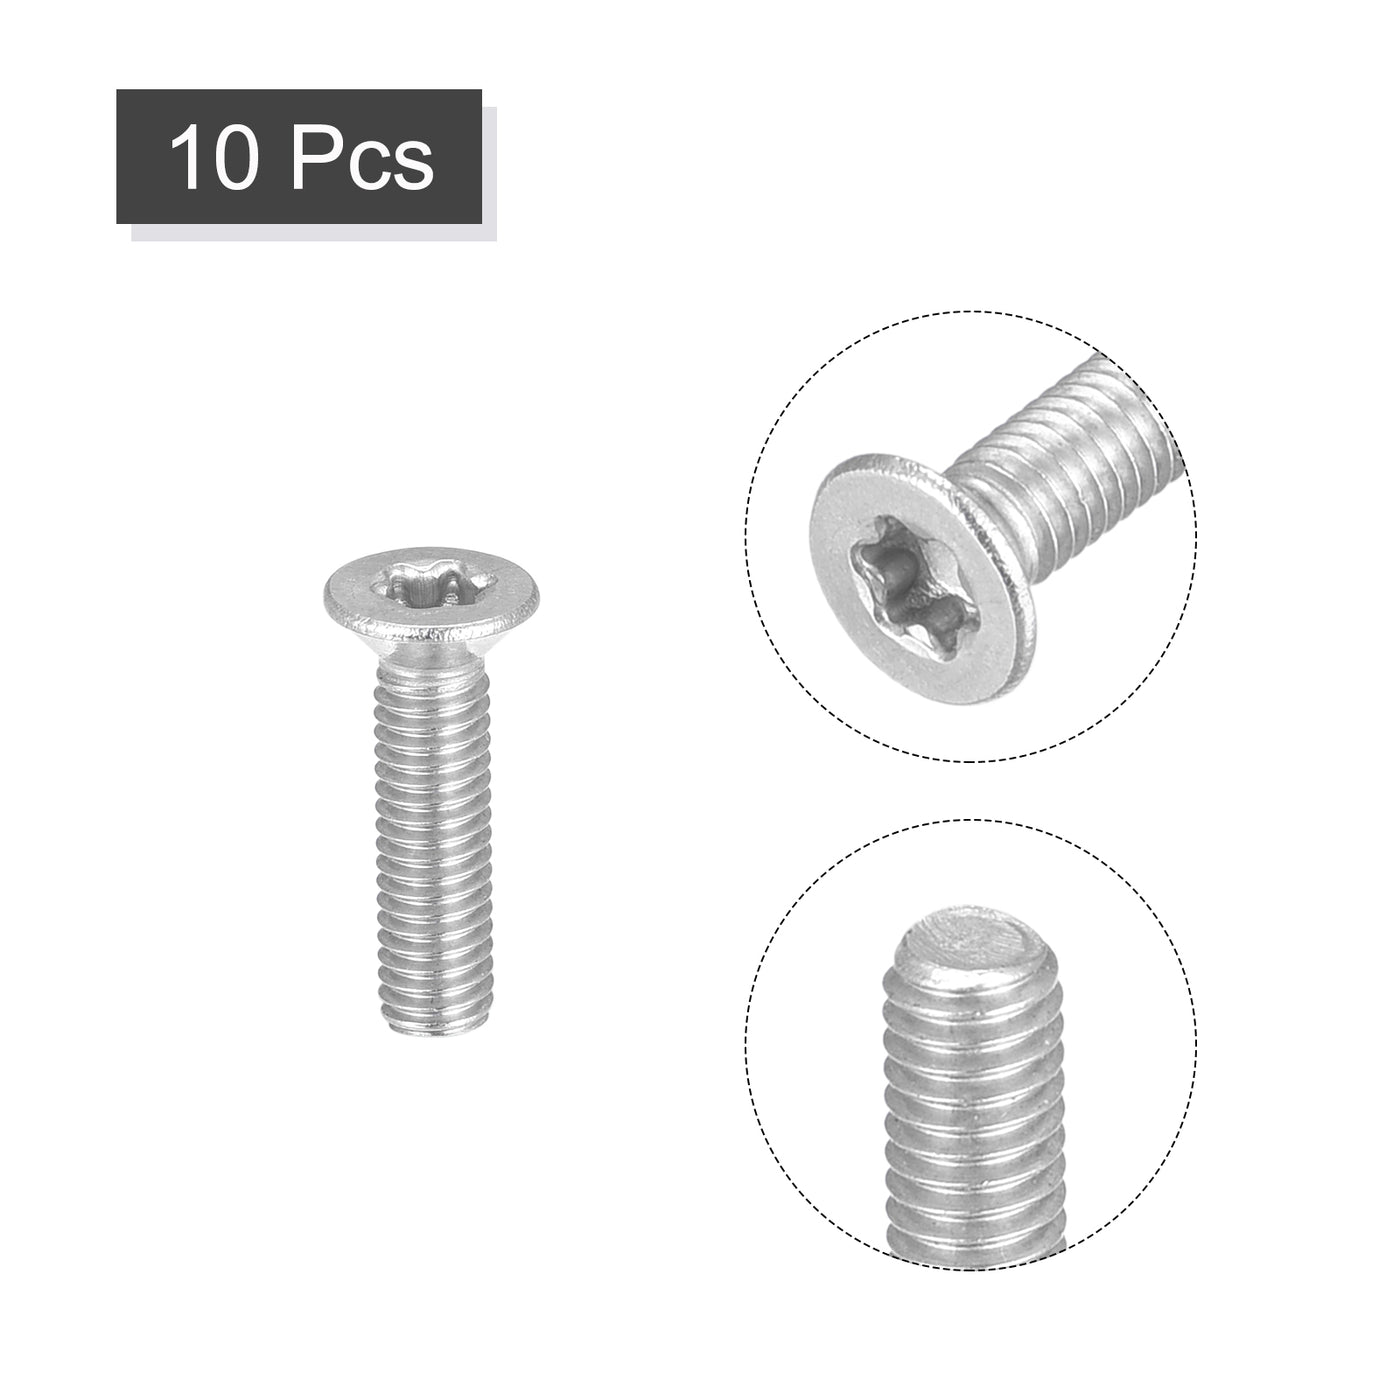 uxcell Uxcell M3x12mm Torx Security Screws, 10pcs 316 Stainless Steel Countersunk Head Screw